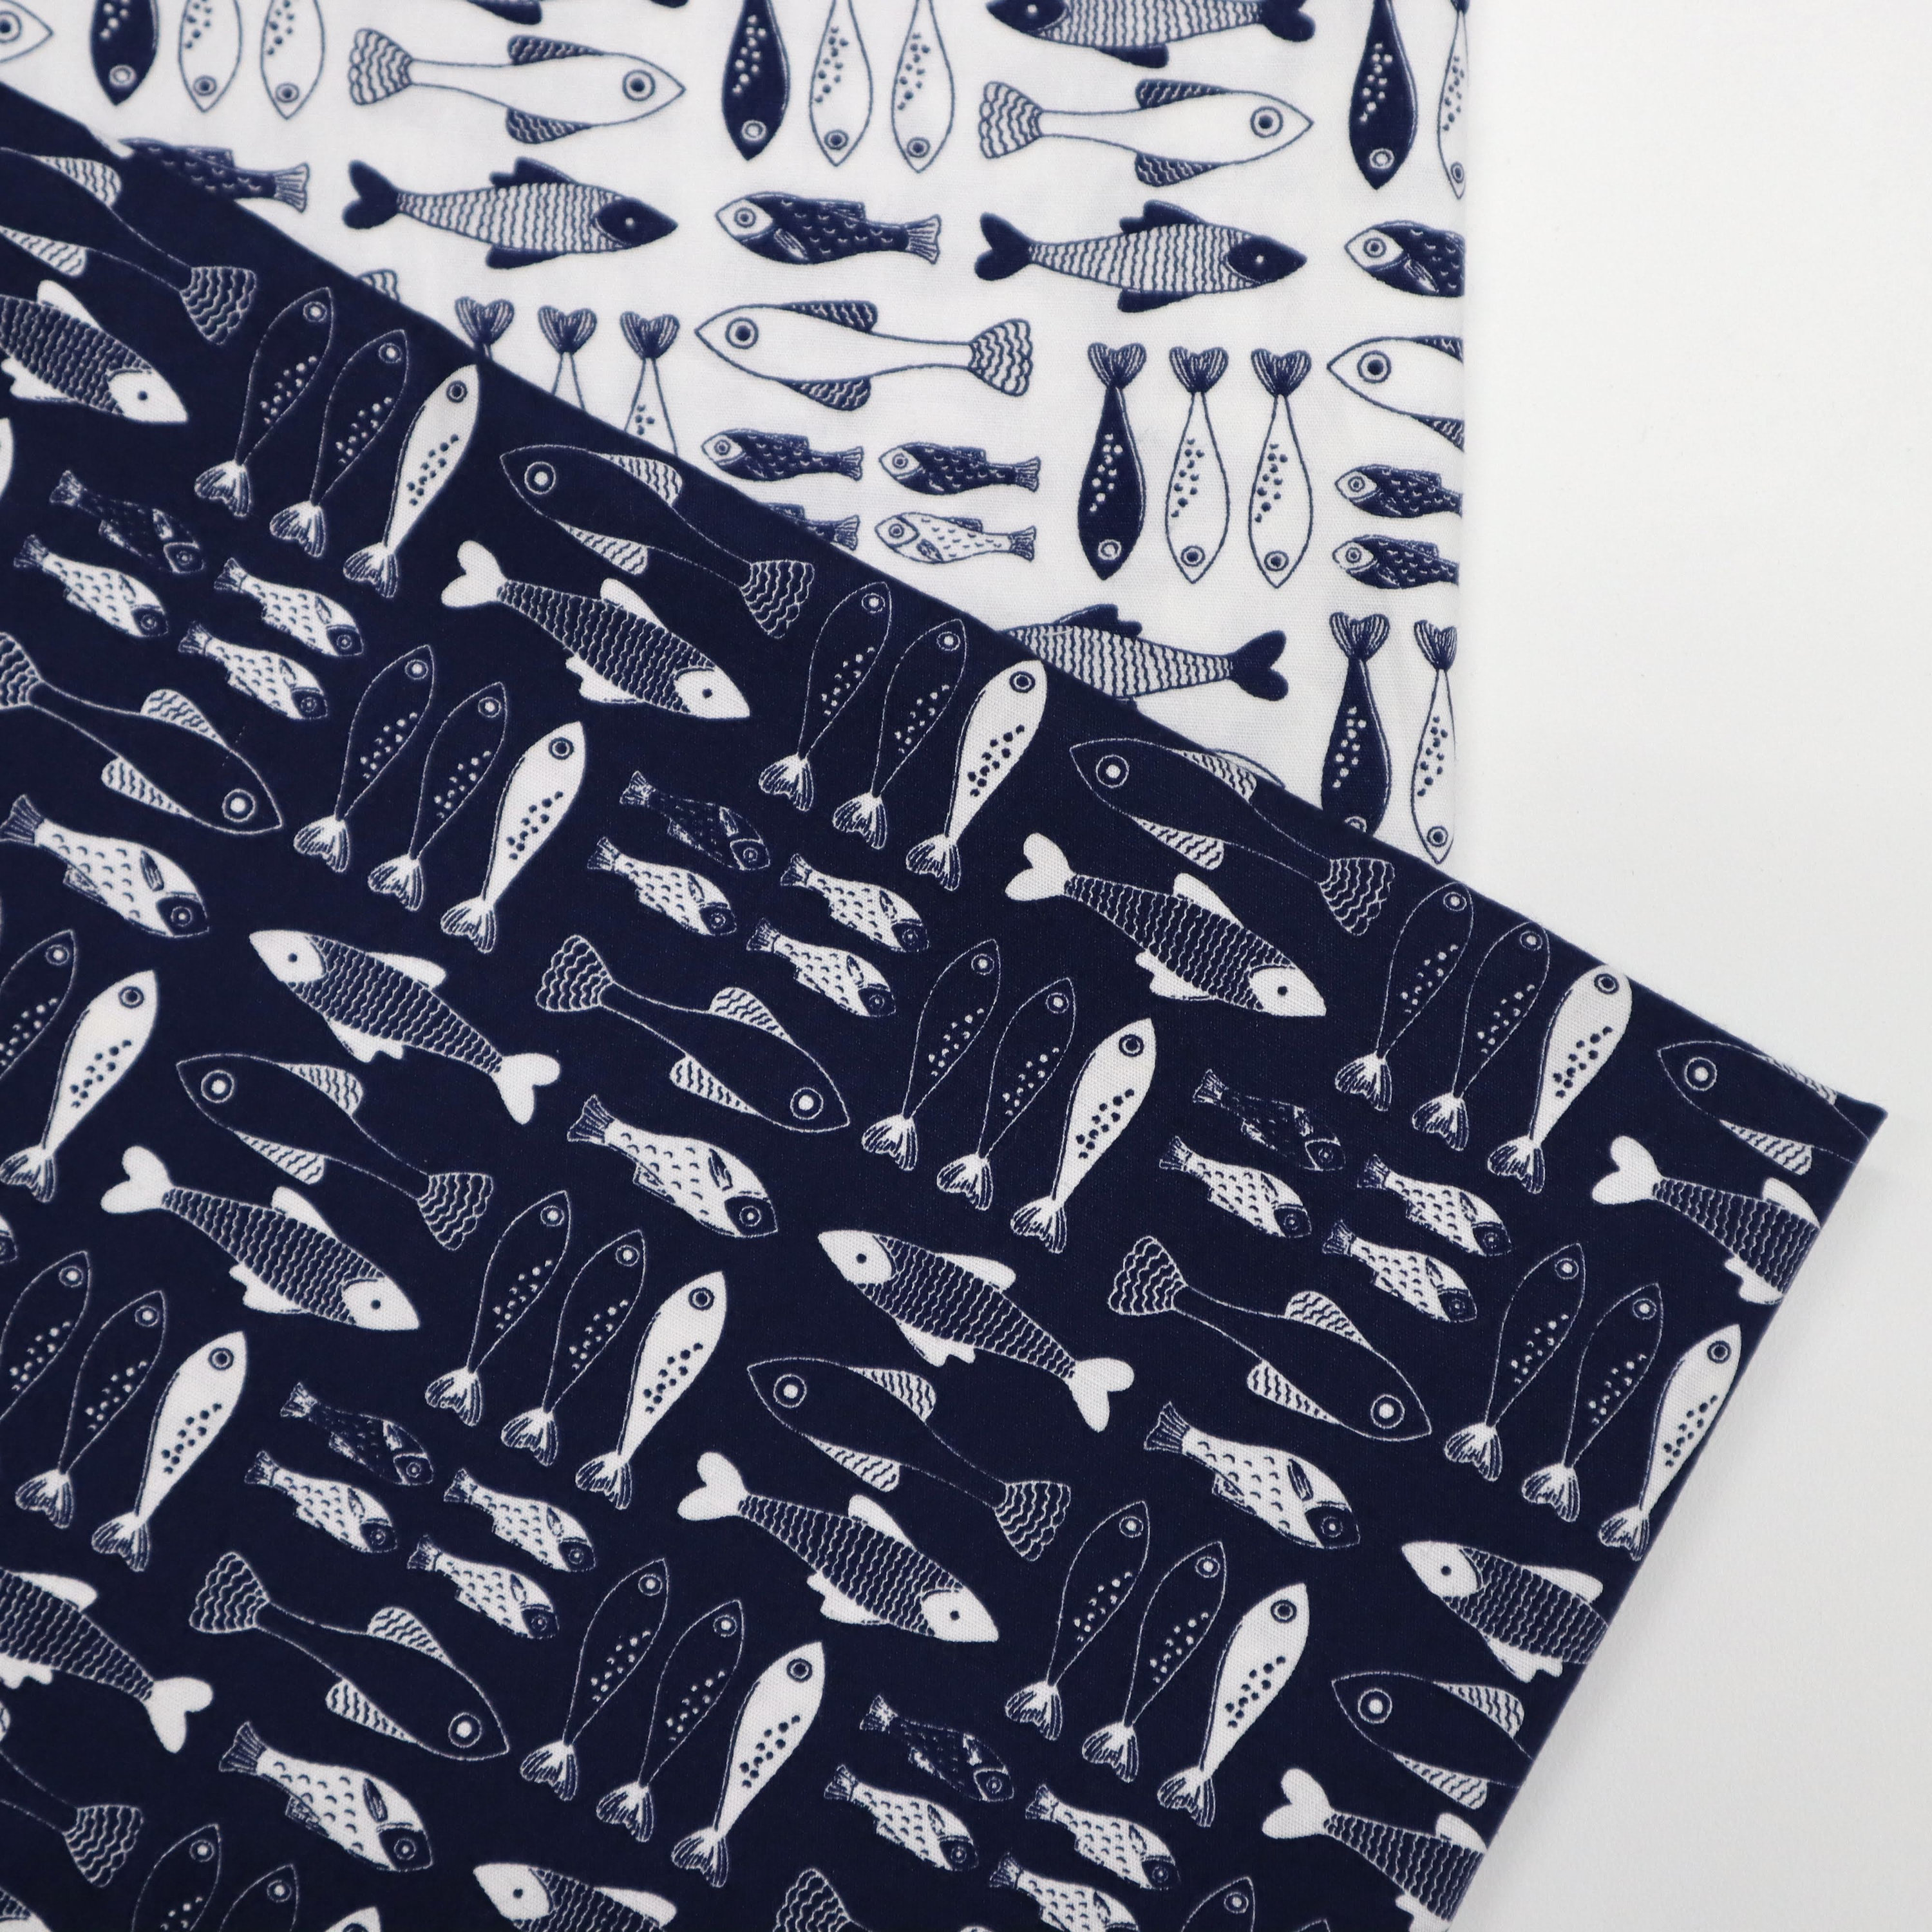 Buy Little Fish Printed Cotton Fabric Fish Print on Navy Blue